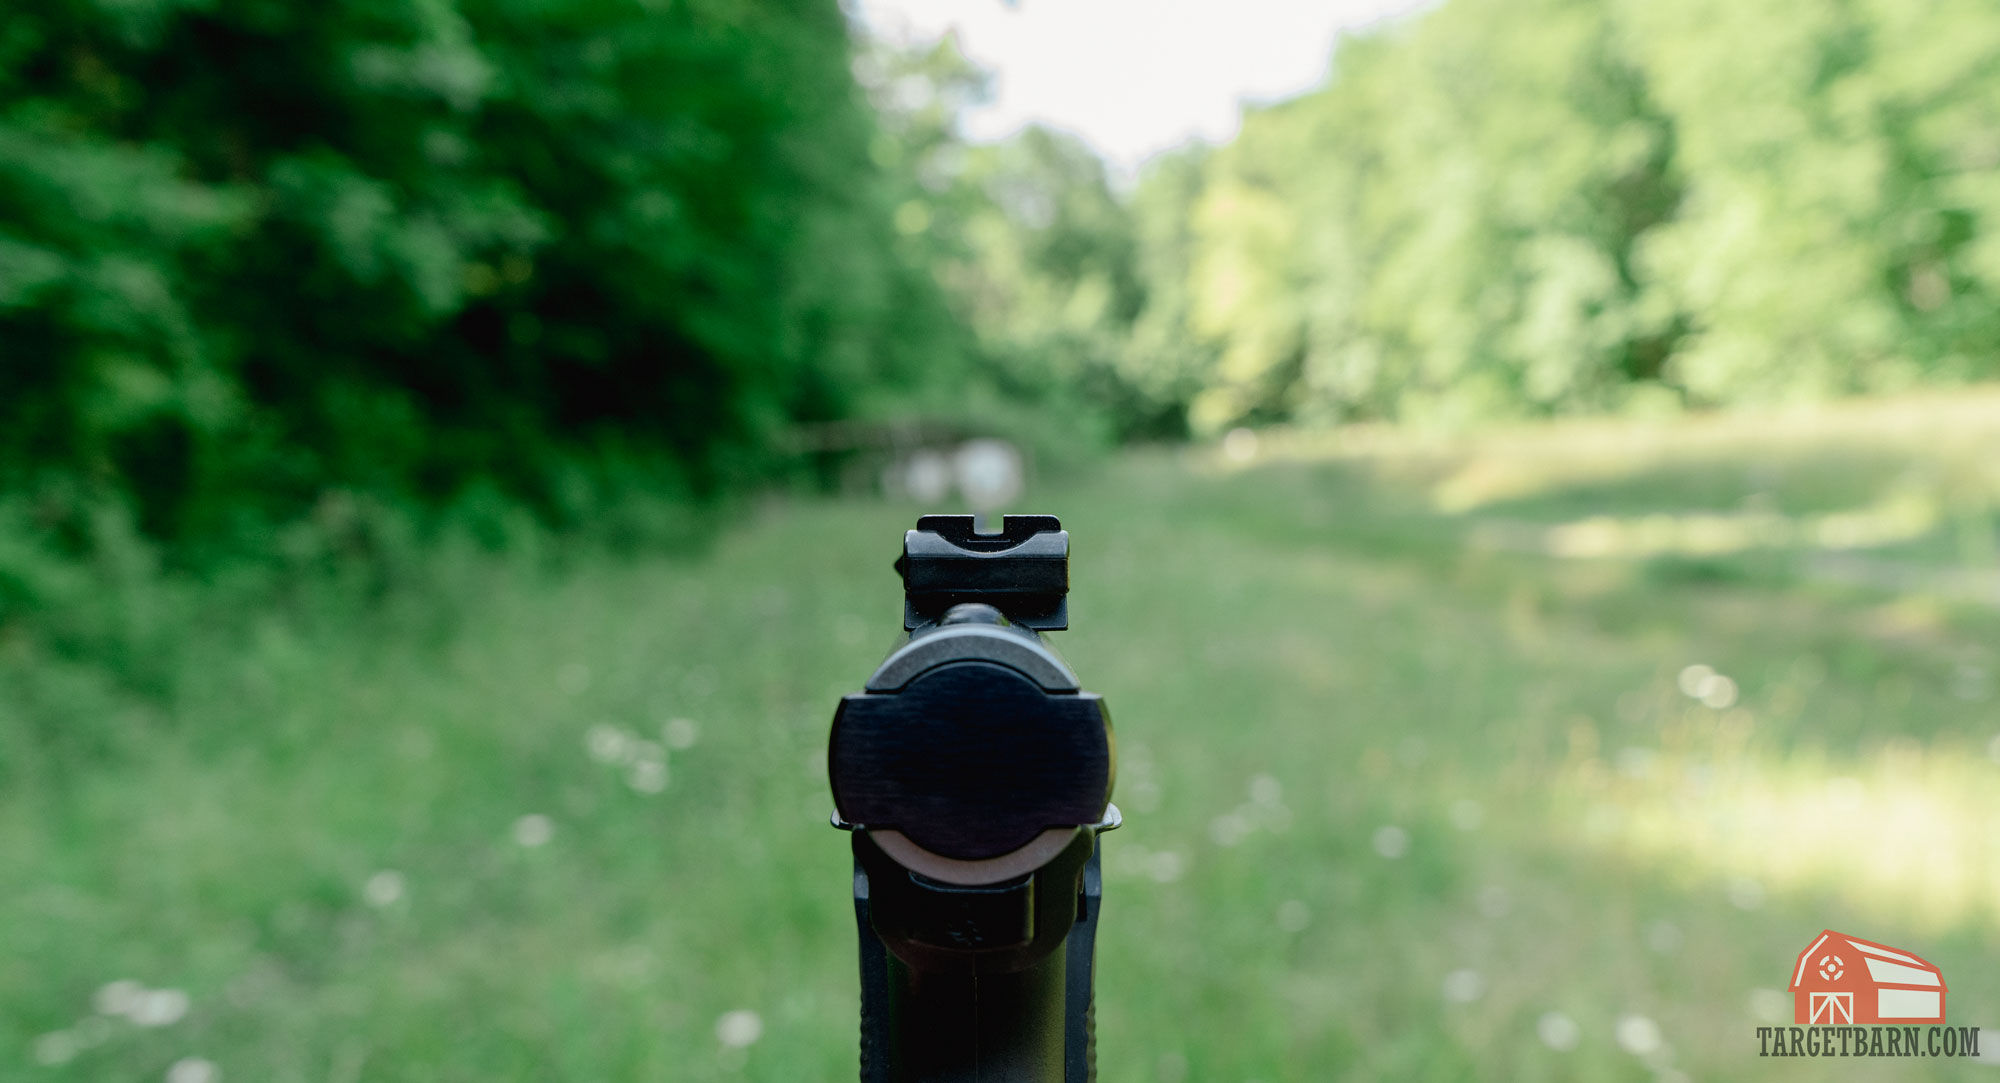 showing the ruger mark iv 22/45 lite rear sights at the range